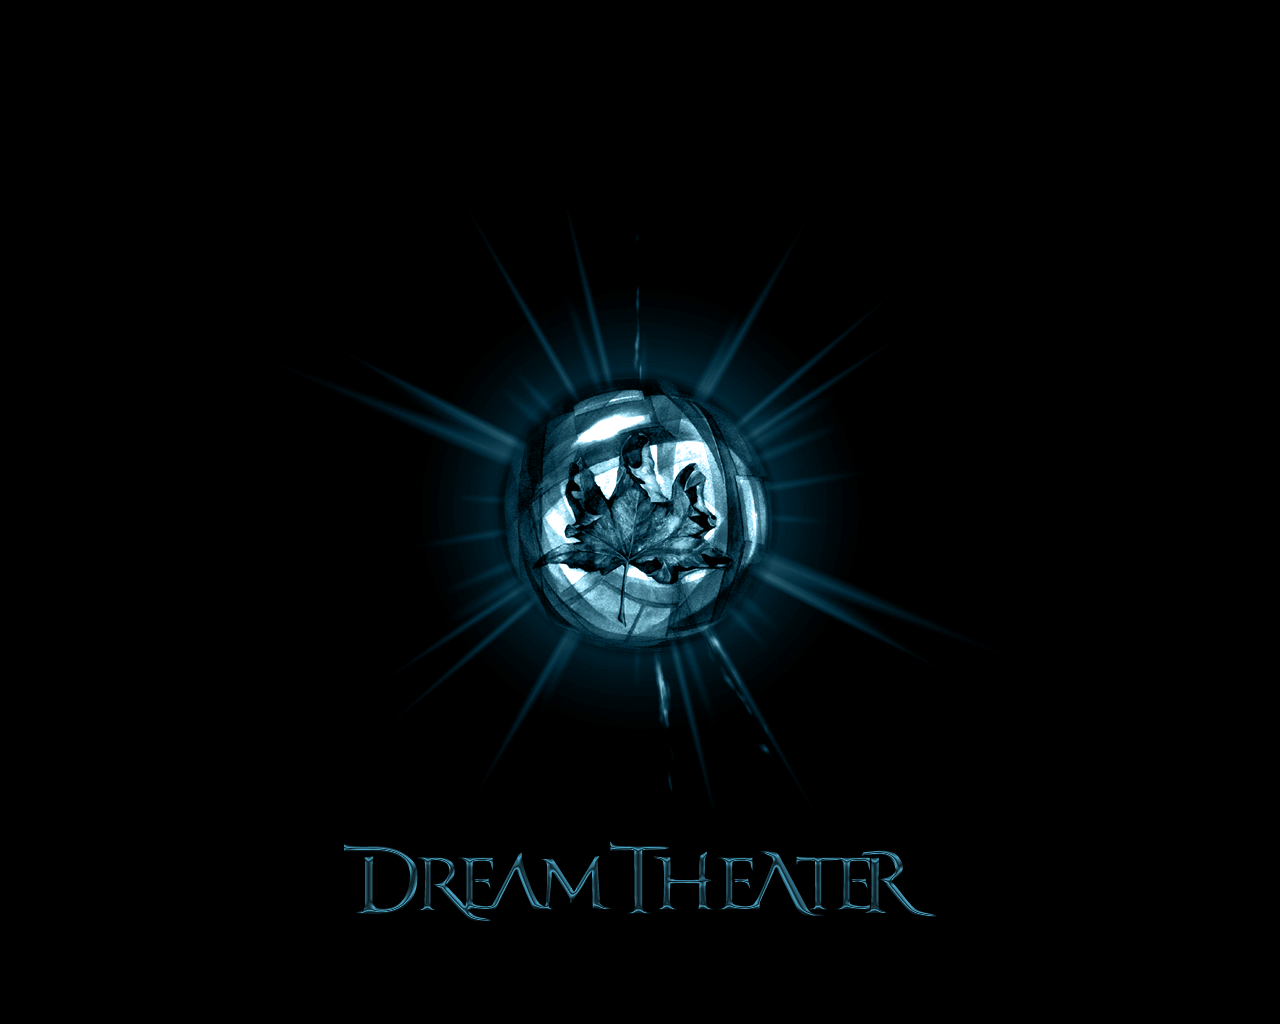 Dream Theater Wallpaper and Background Imagex1024